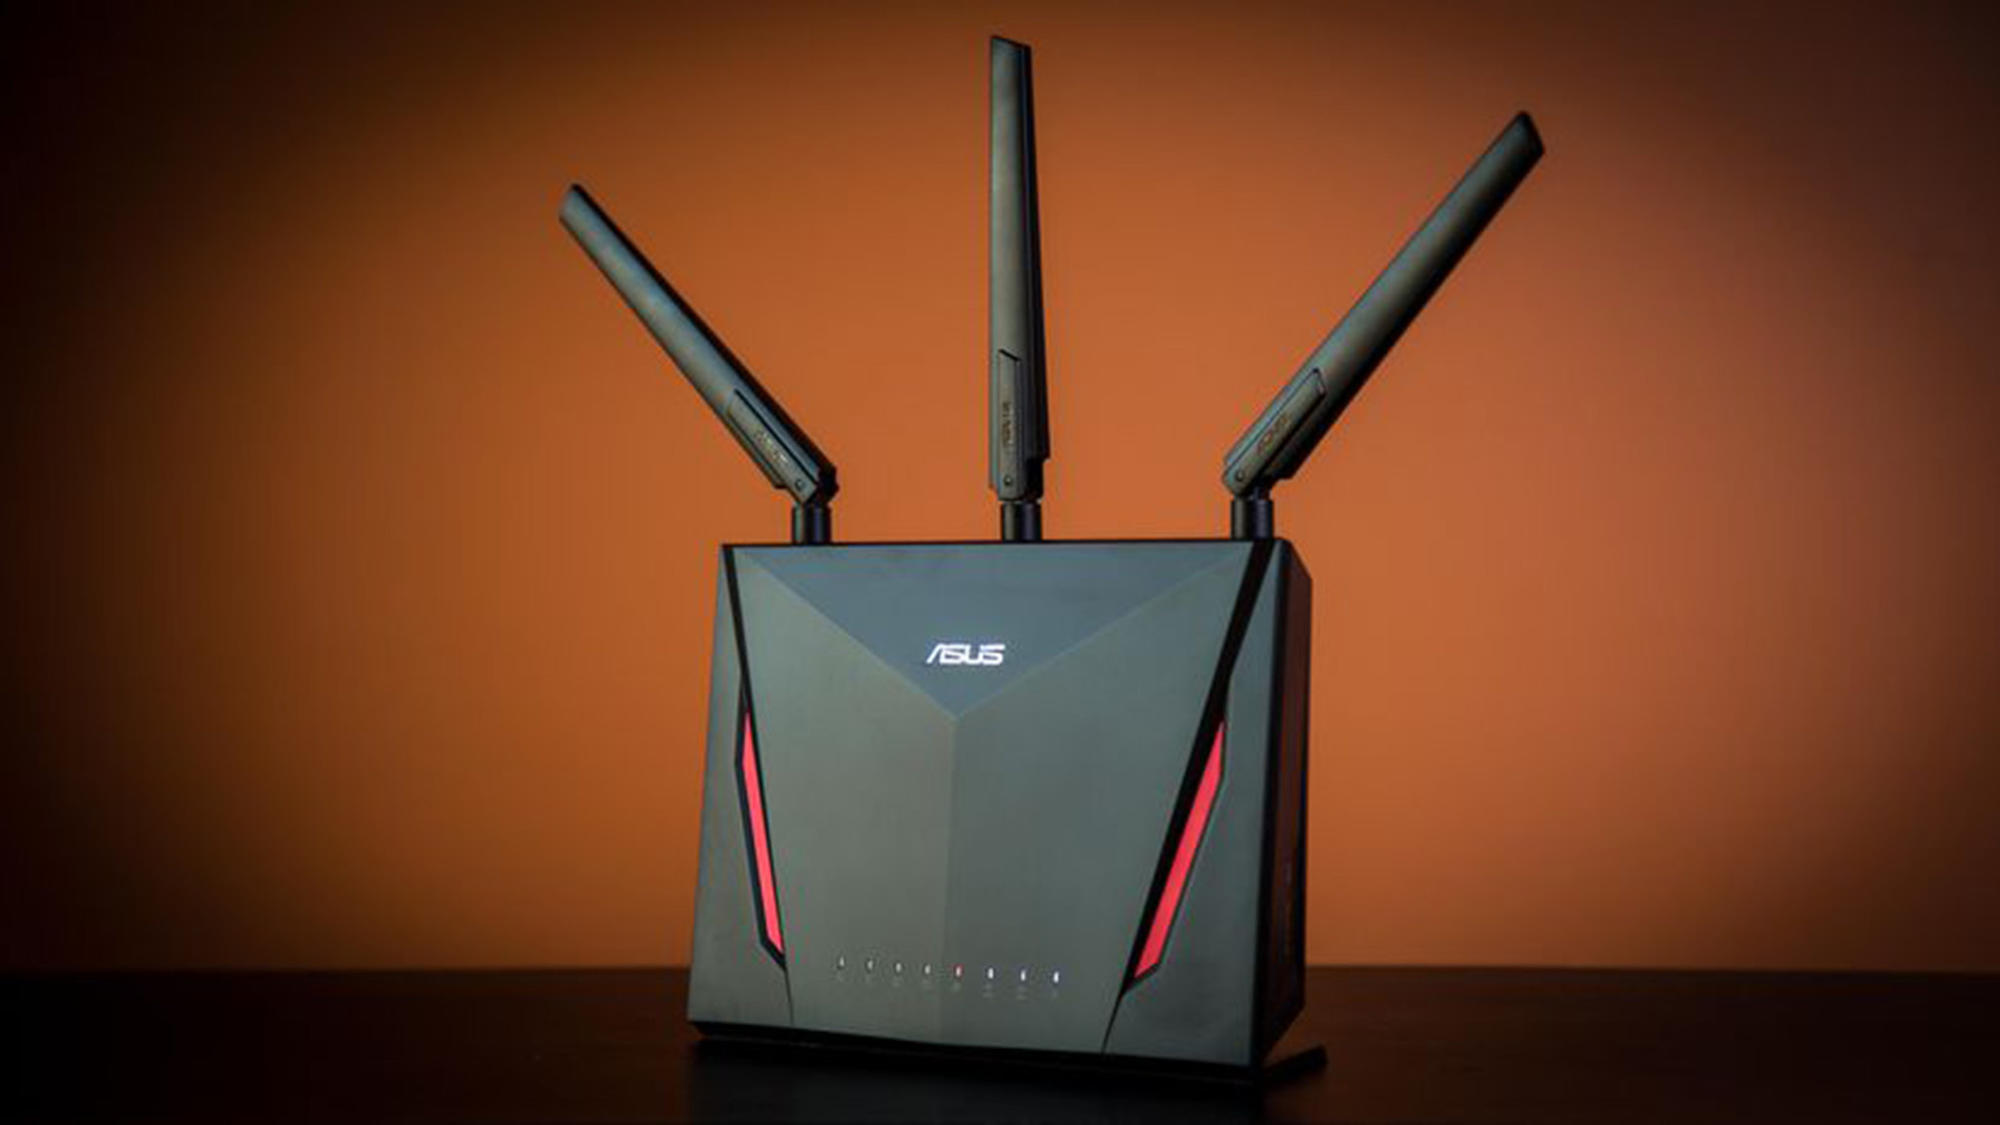 CNET: Best Wireless Routers For 2018 - Hartford Courant